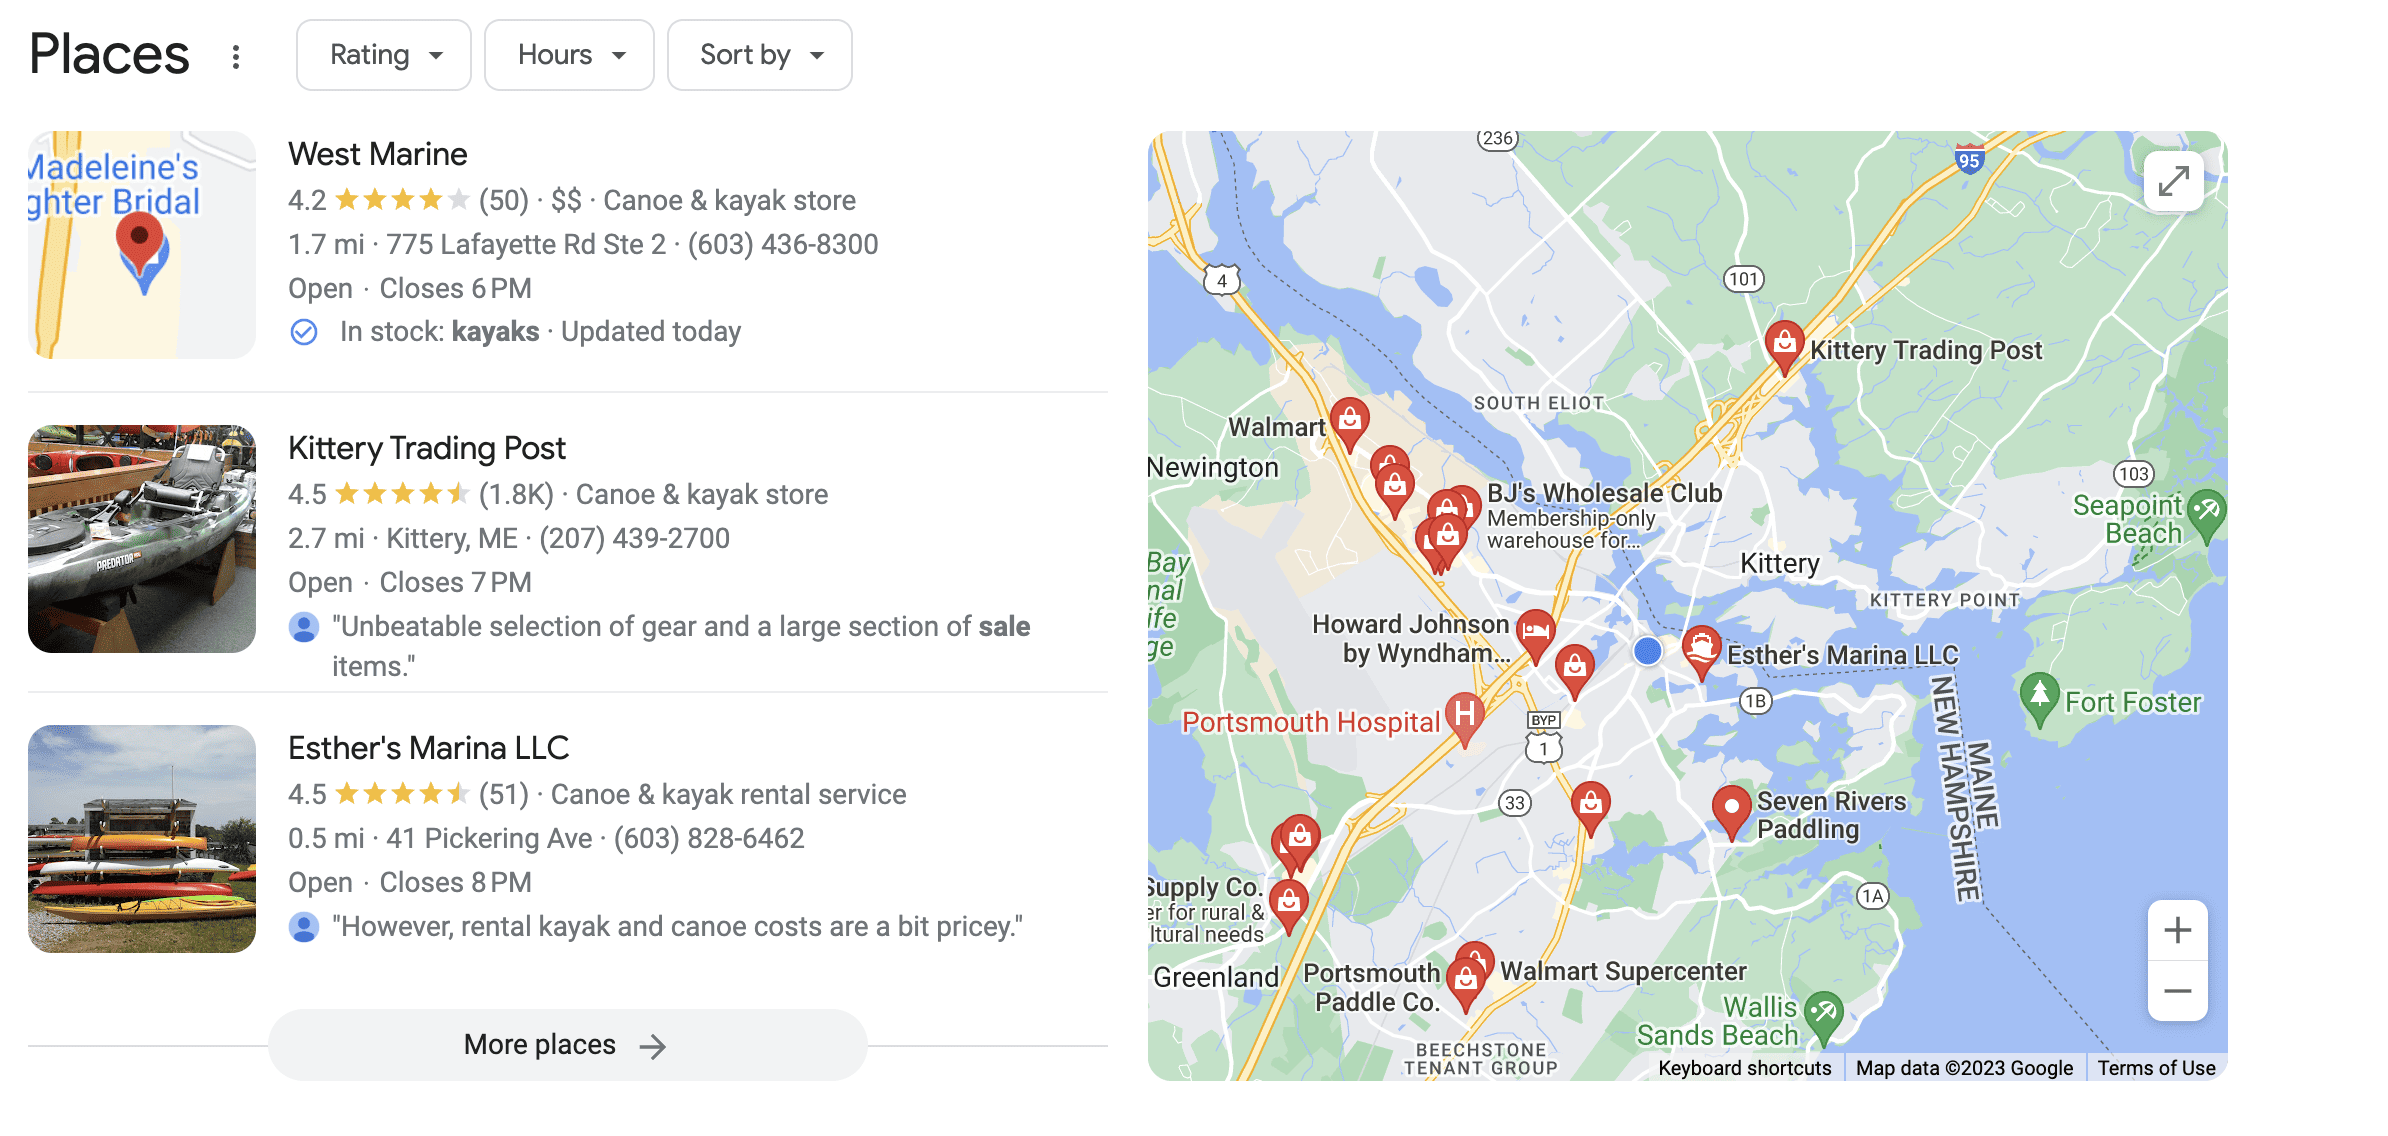 A Google SERP showing local inventory ads for stores that sell kayaks. There are three ads, each with an image, the name of the store, and store information. Next to the ads there is a Google map showing the locations of the stores.